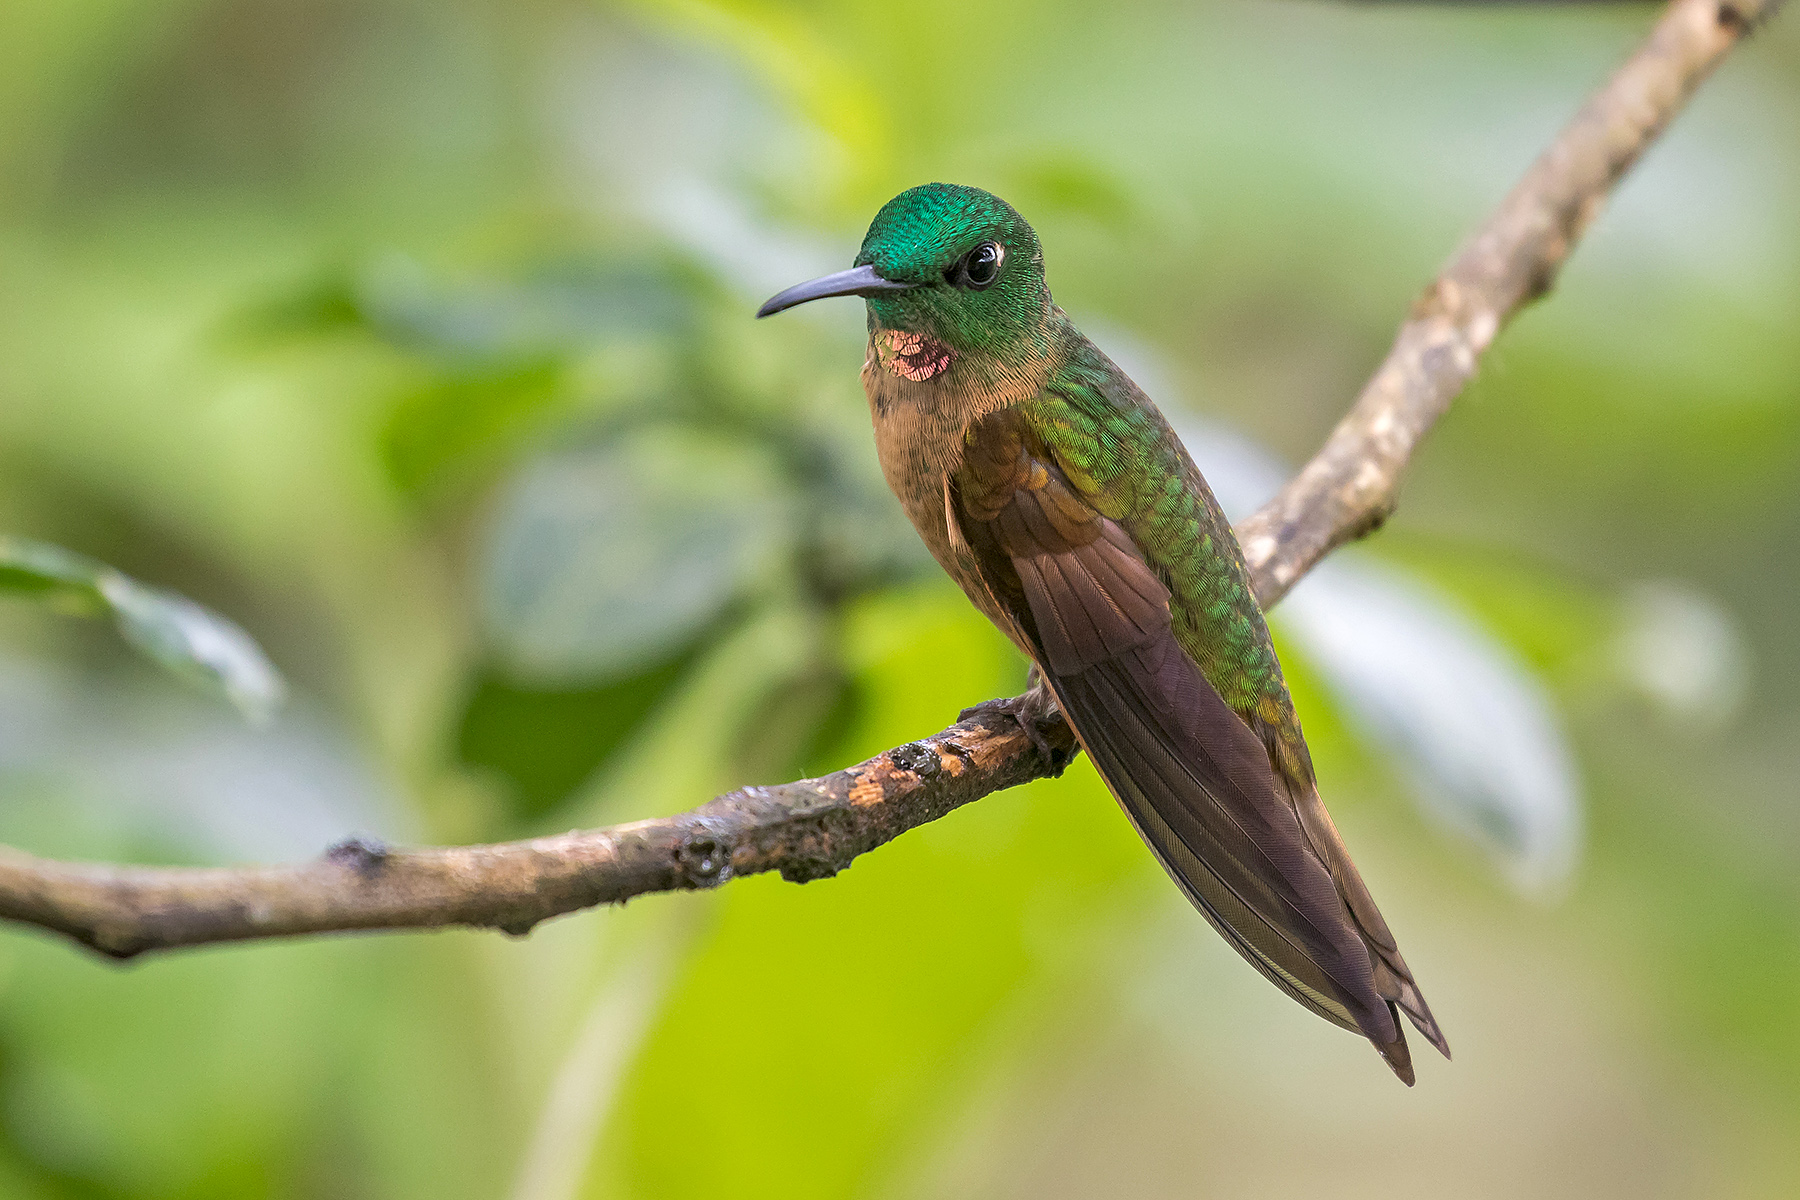 Fawn-breasted Brilliant in Ecuador (image by Pete Morris)